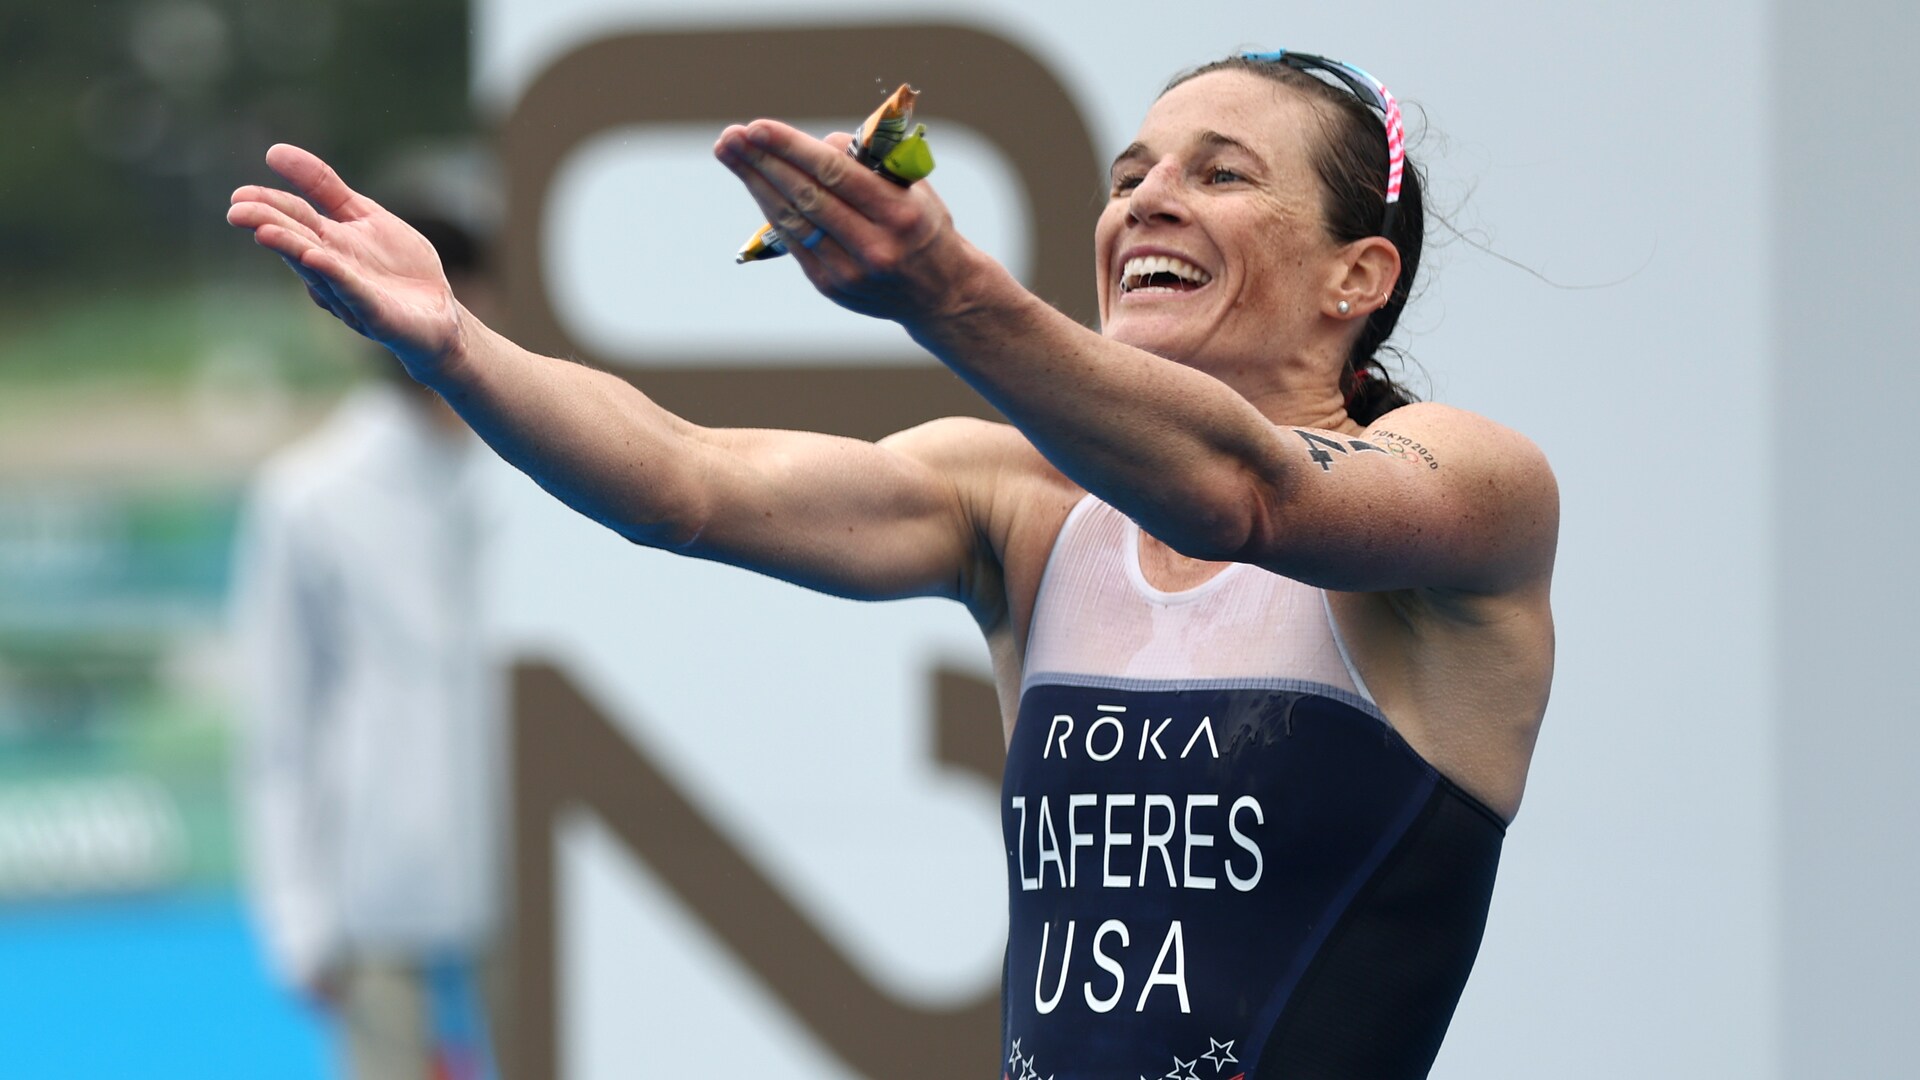 Podcast: Katie Zaferes Explains How Preparing for All Weather Conditions Earned Her an Olympic Bronze